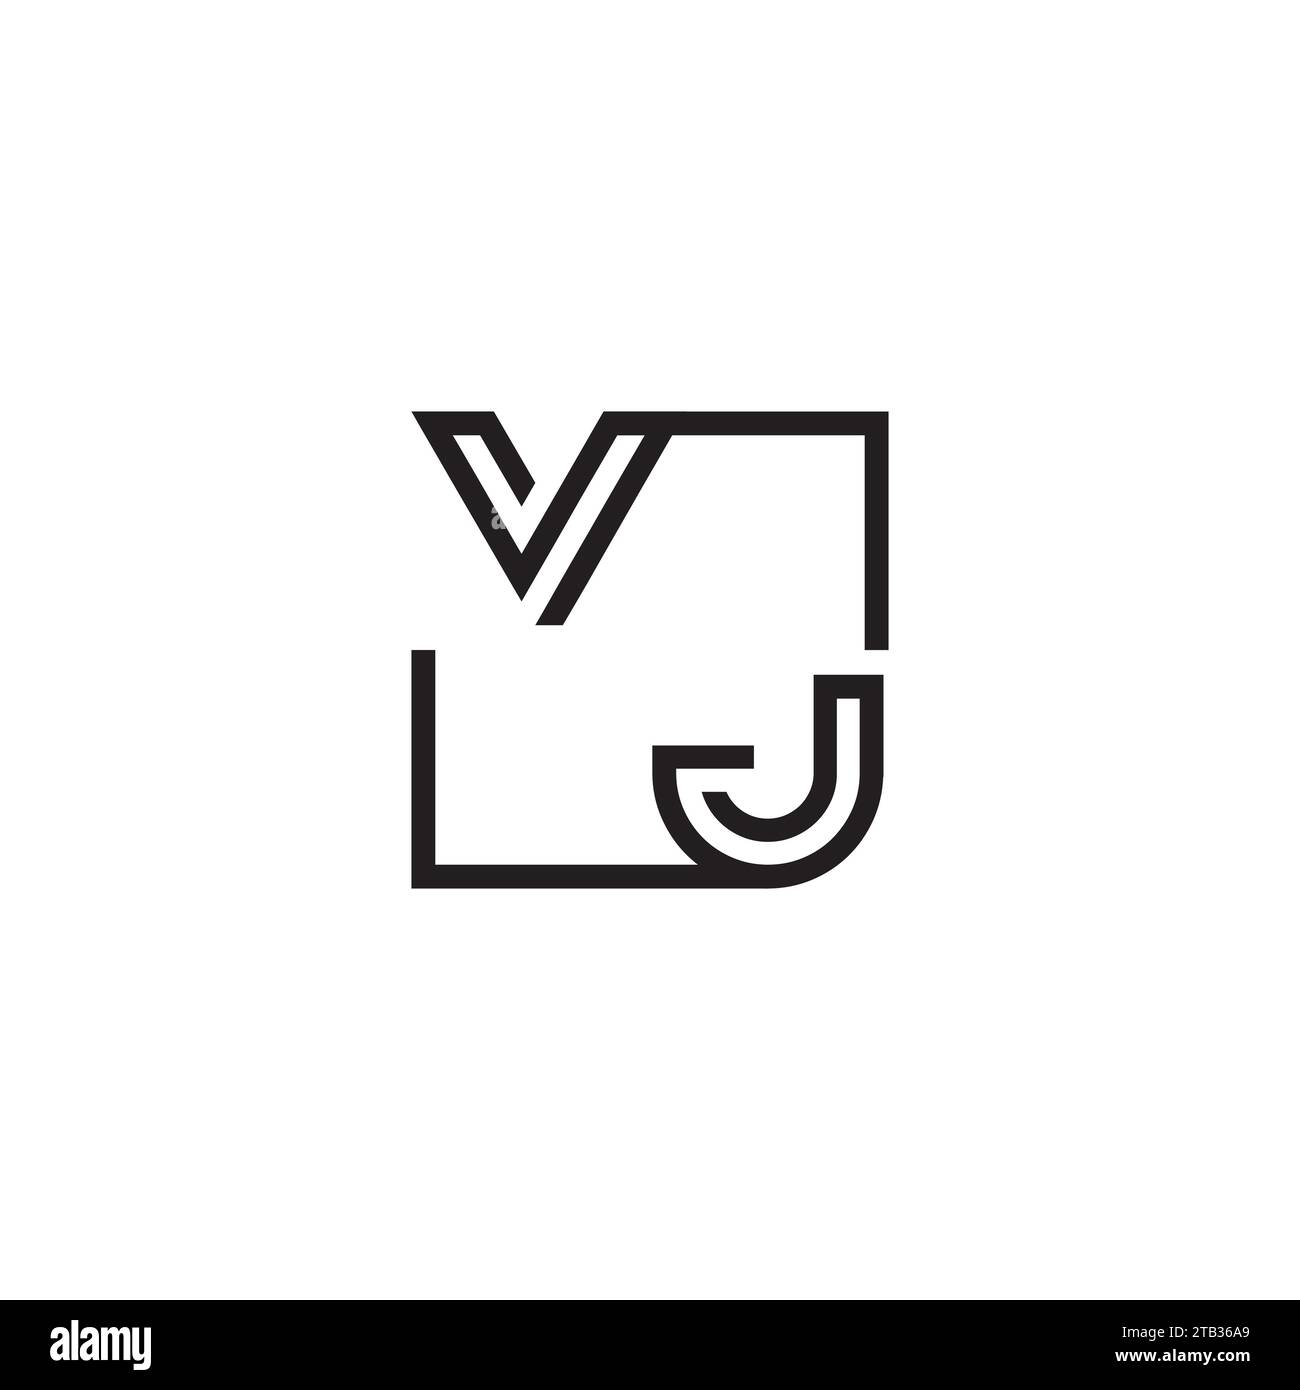 VJ initial logo letters in high quality professional design that will print well across any print media Stock Vector